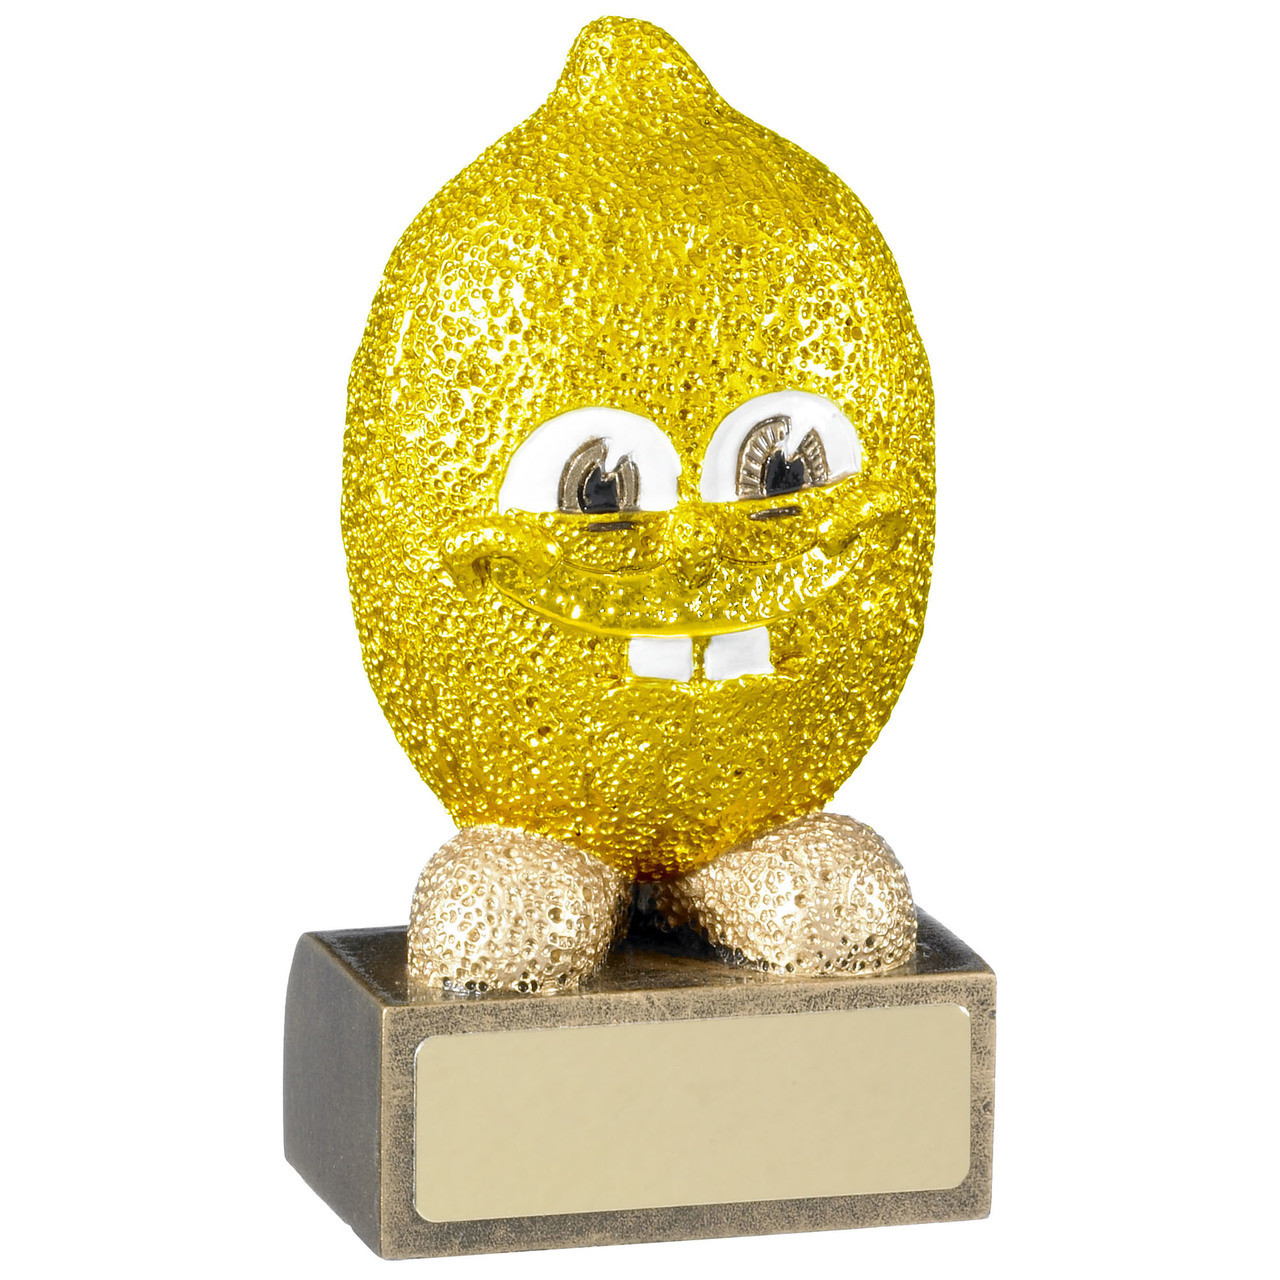 Novelty comic fun silly joke Award. Great Value from 1stplace4Trophies